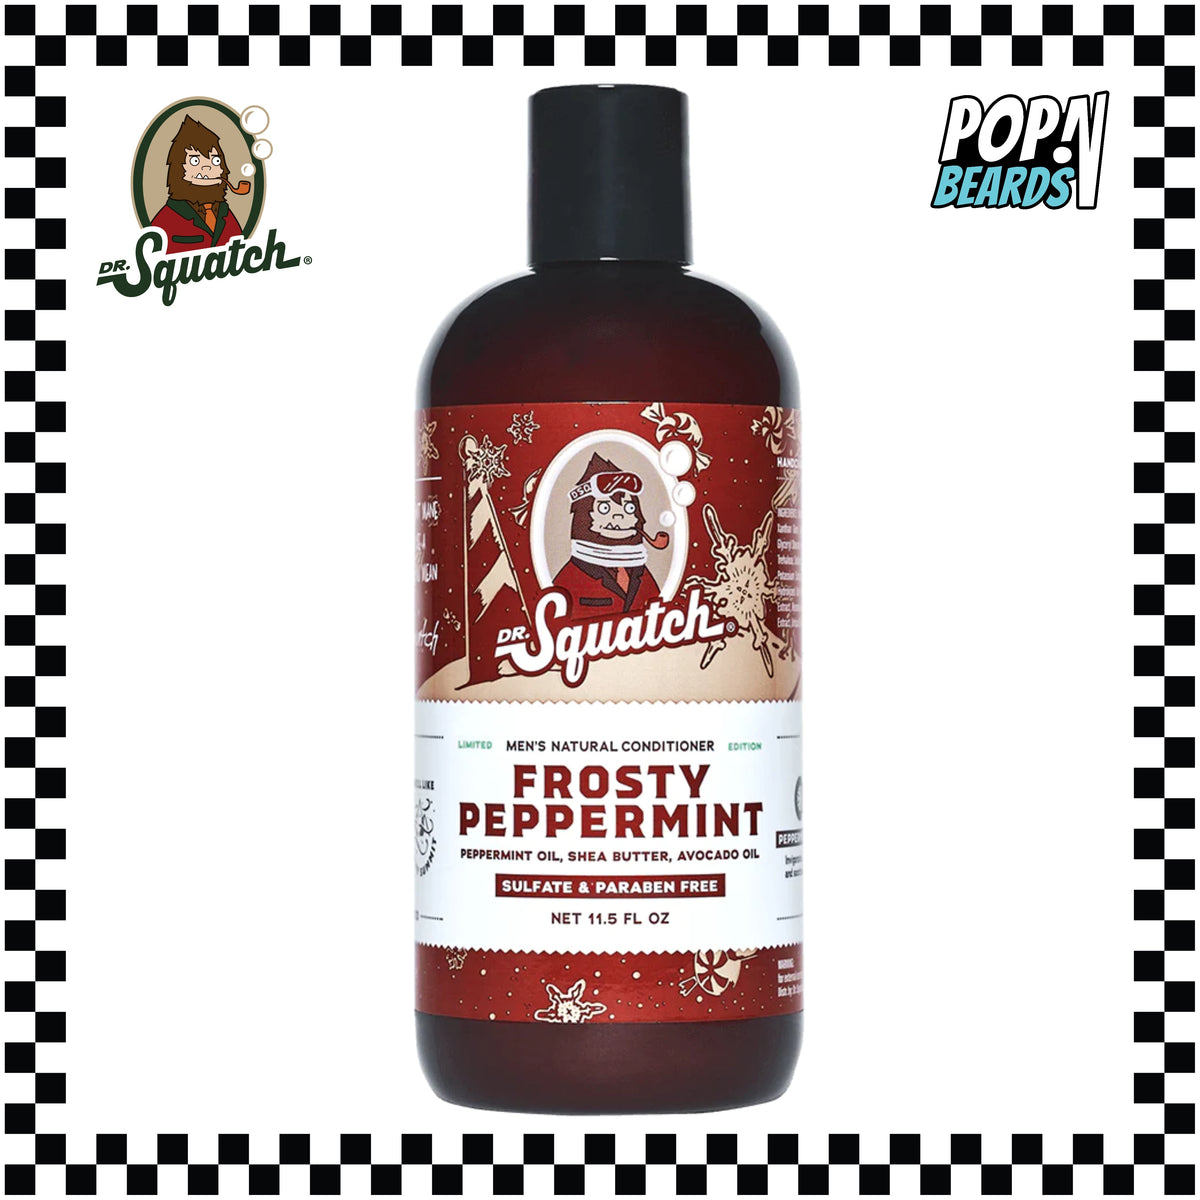 ❄️NEW Frosty Peppermint Haircare❄️ - Dr. Squatch Official Announcement 